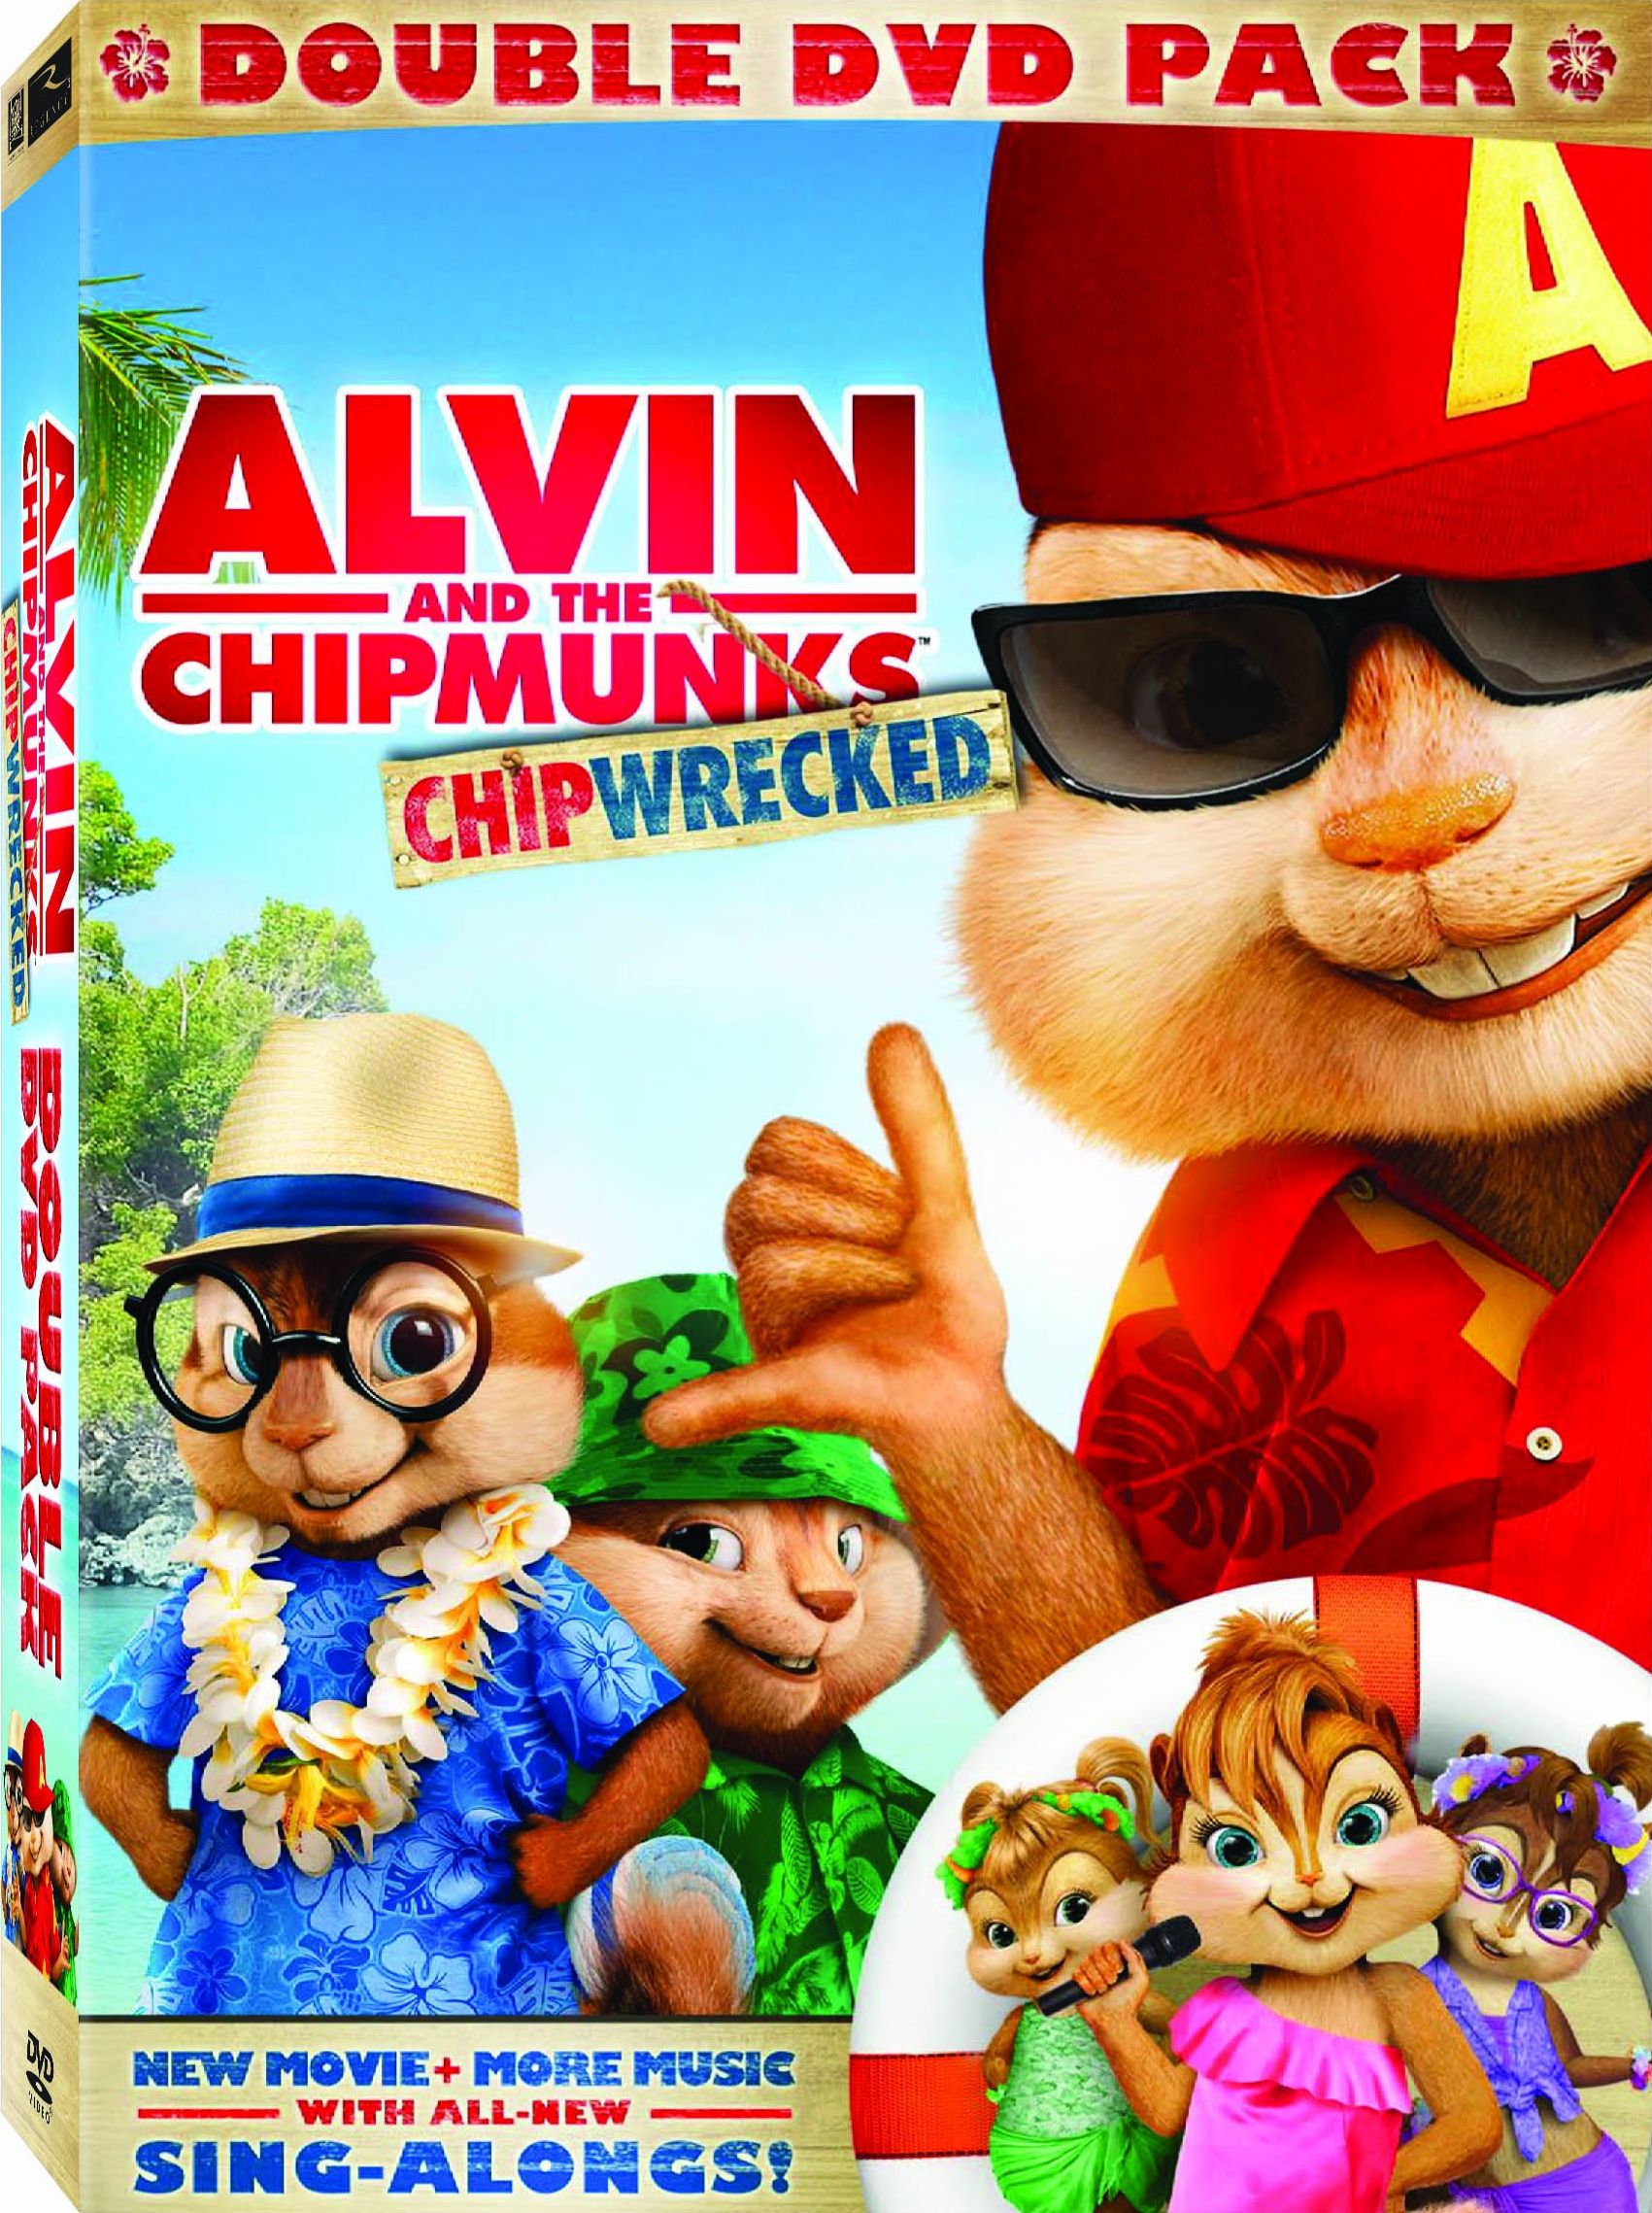 Alvin and the Chipmunks: Chipwrecked (Two Disc Edition) DVD.